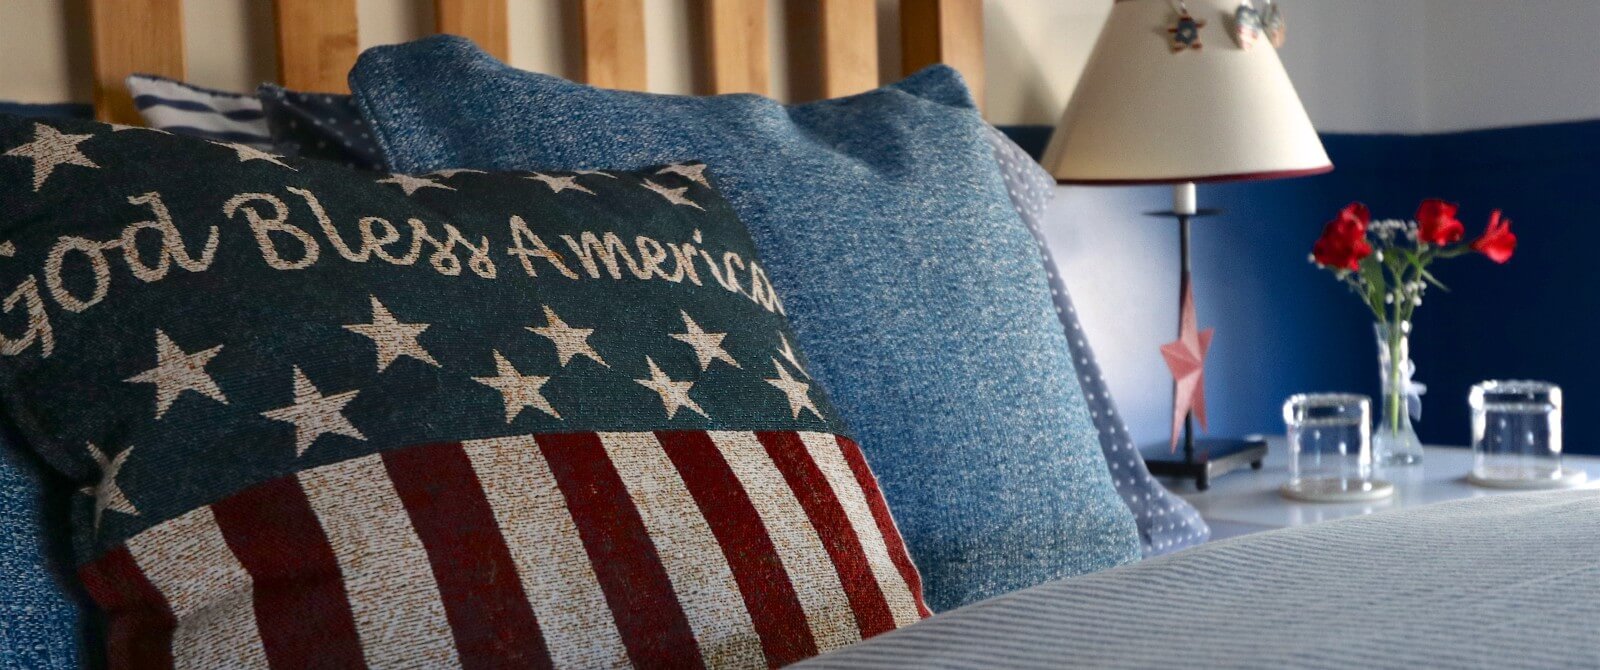 Bed with denim bedding, an American flag pillow and side table with lamps and water glasses